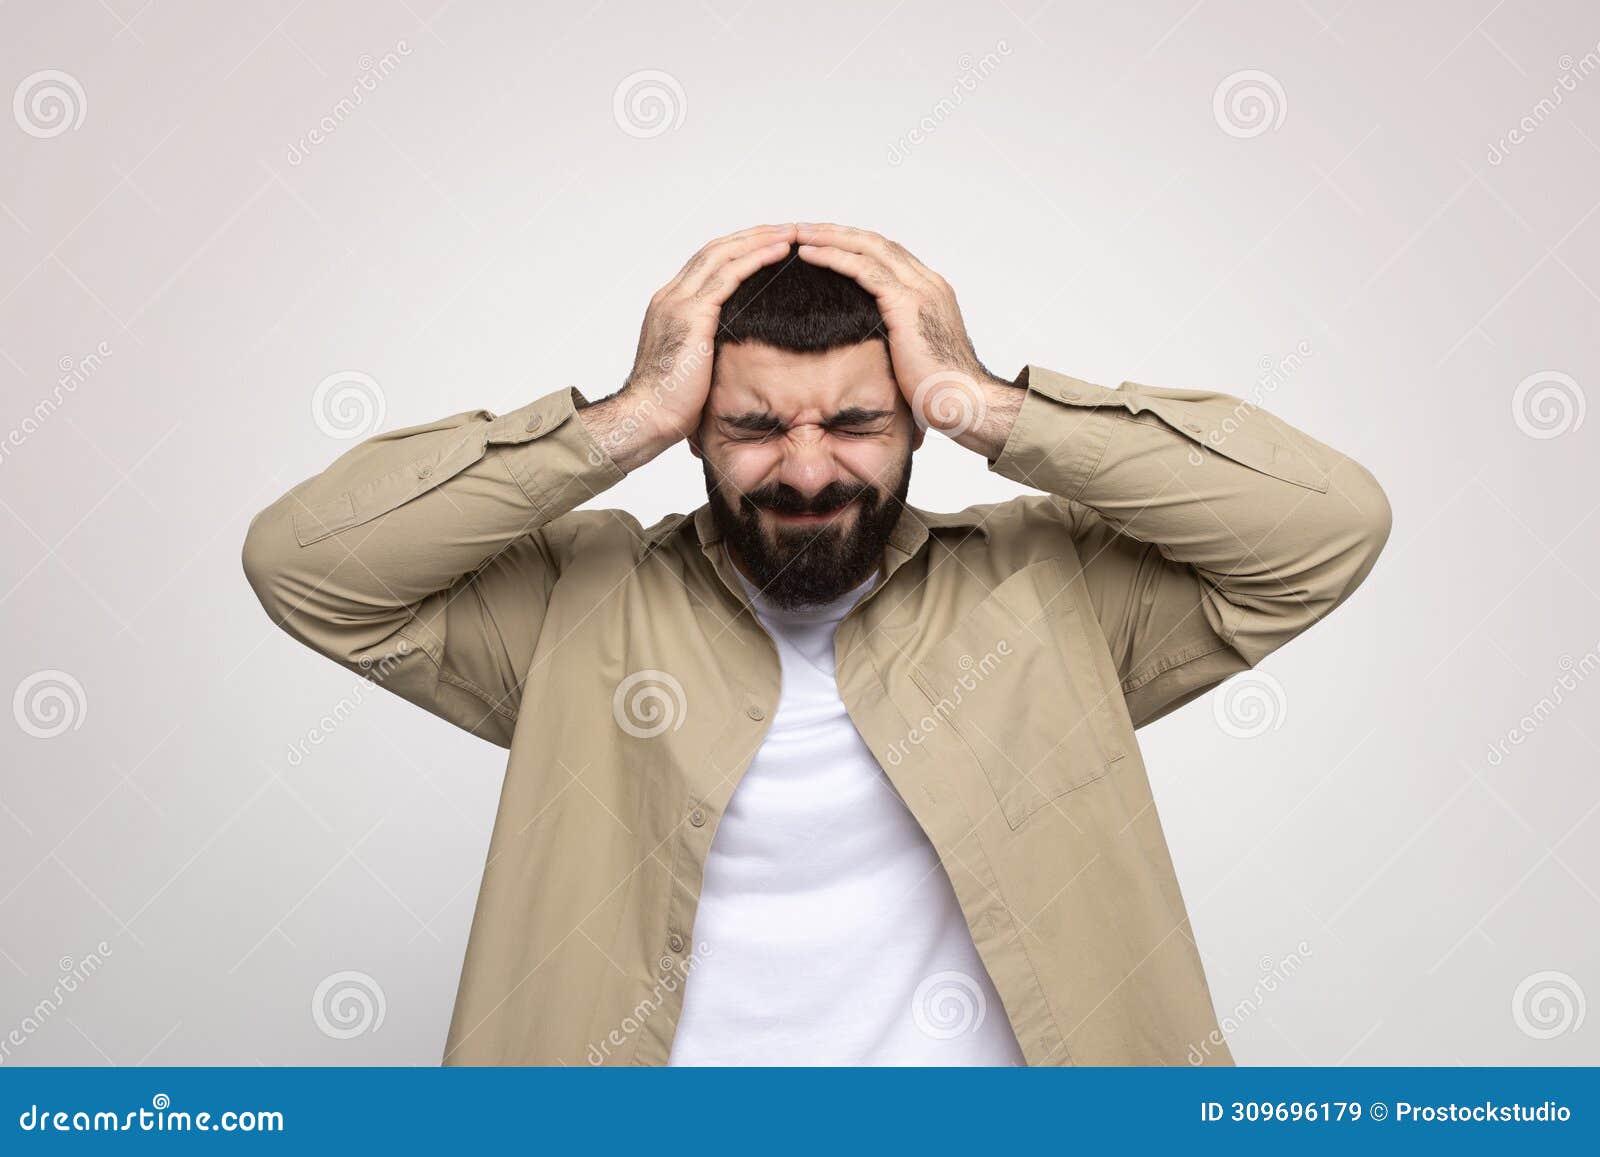 Stressed man with a beard grimacing in frustration, holding his head in his hands. Stressed millennial arab man with a beard grimacing in frustration, holding his head in his hands, wearing a beige jacket over a white t-shirt, against a light background